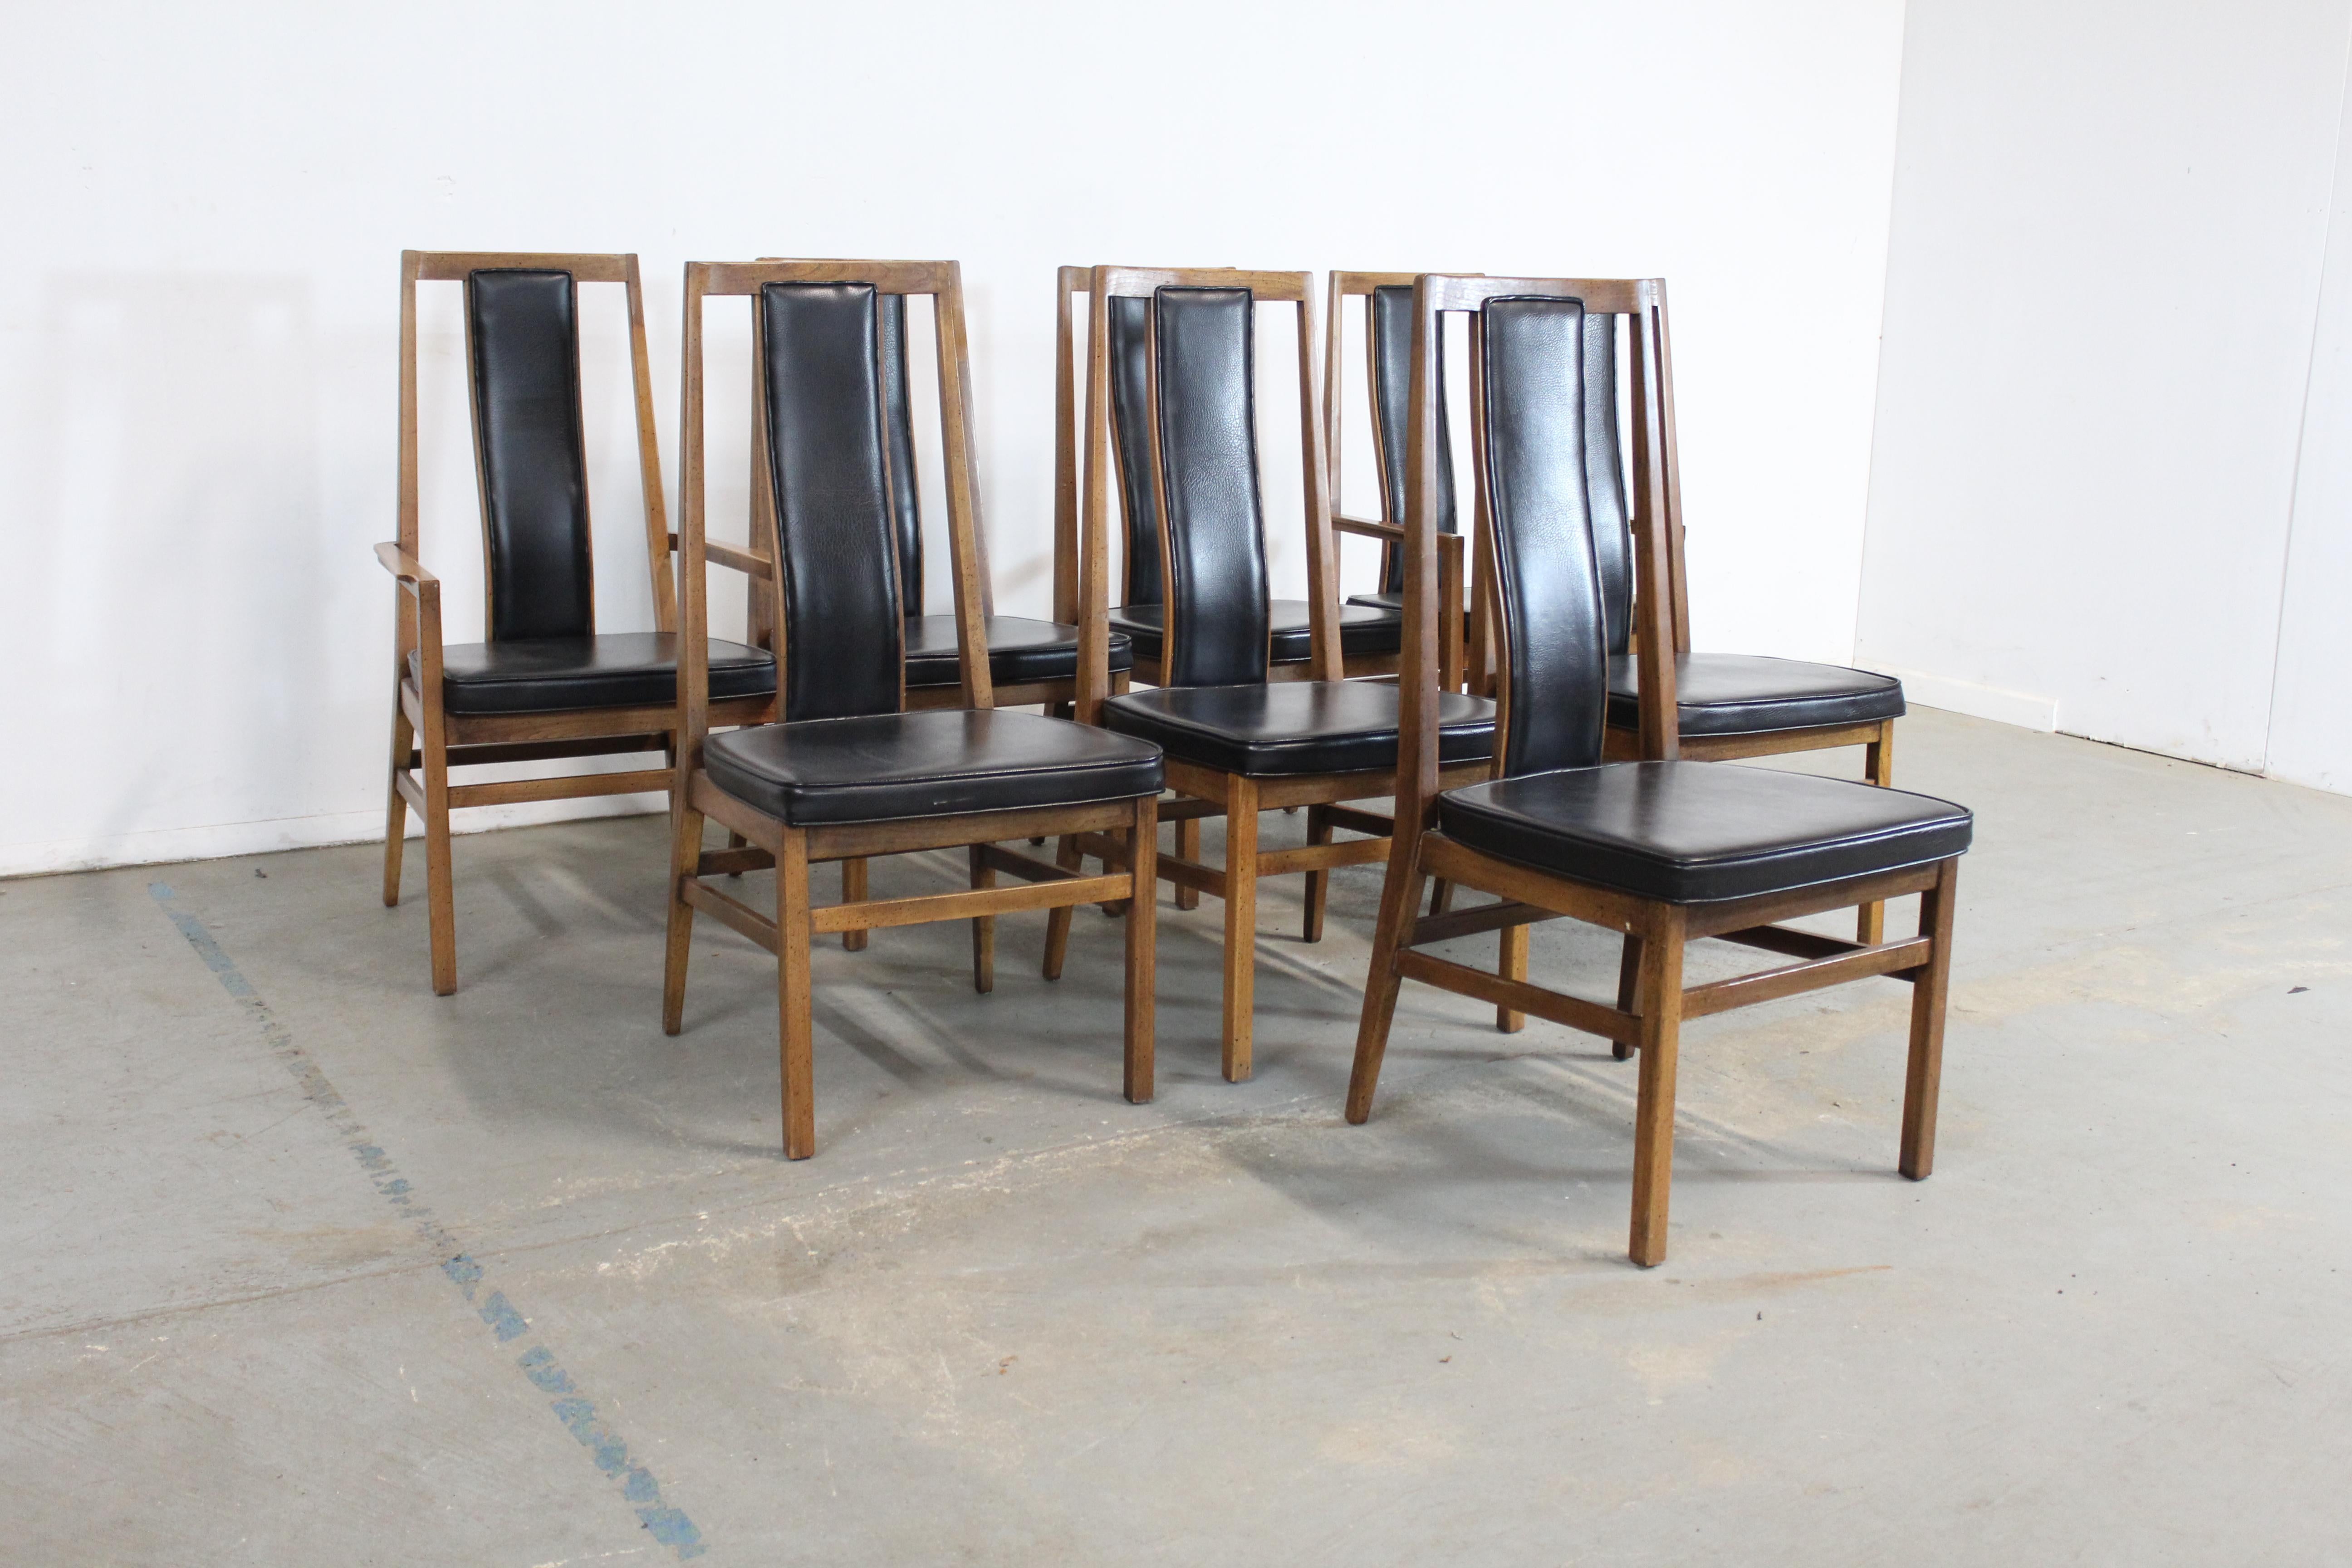 Set of 8 Mid-Century Modern tall back dining chairs by Founders

Offered is a set of set of 8 Mid-Century Modern tall back dining chairs by Founders. Includes 6 side chairs and 2 arm chairs. These chairs have a fantastic look featuring a tall back